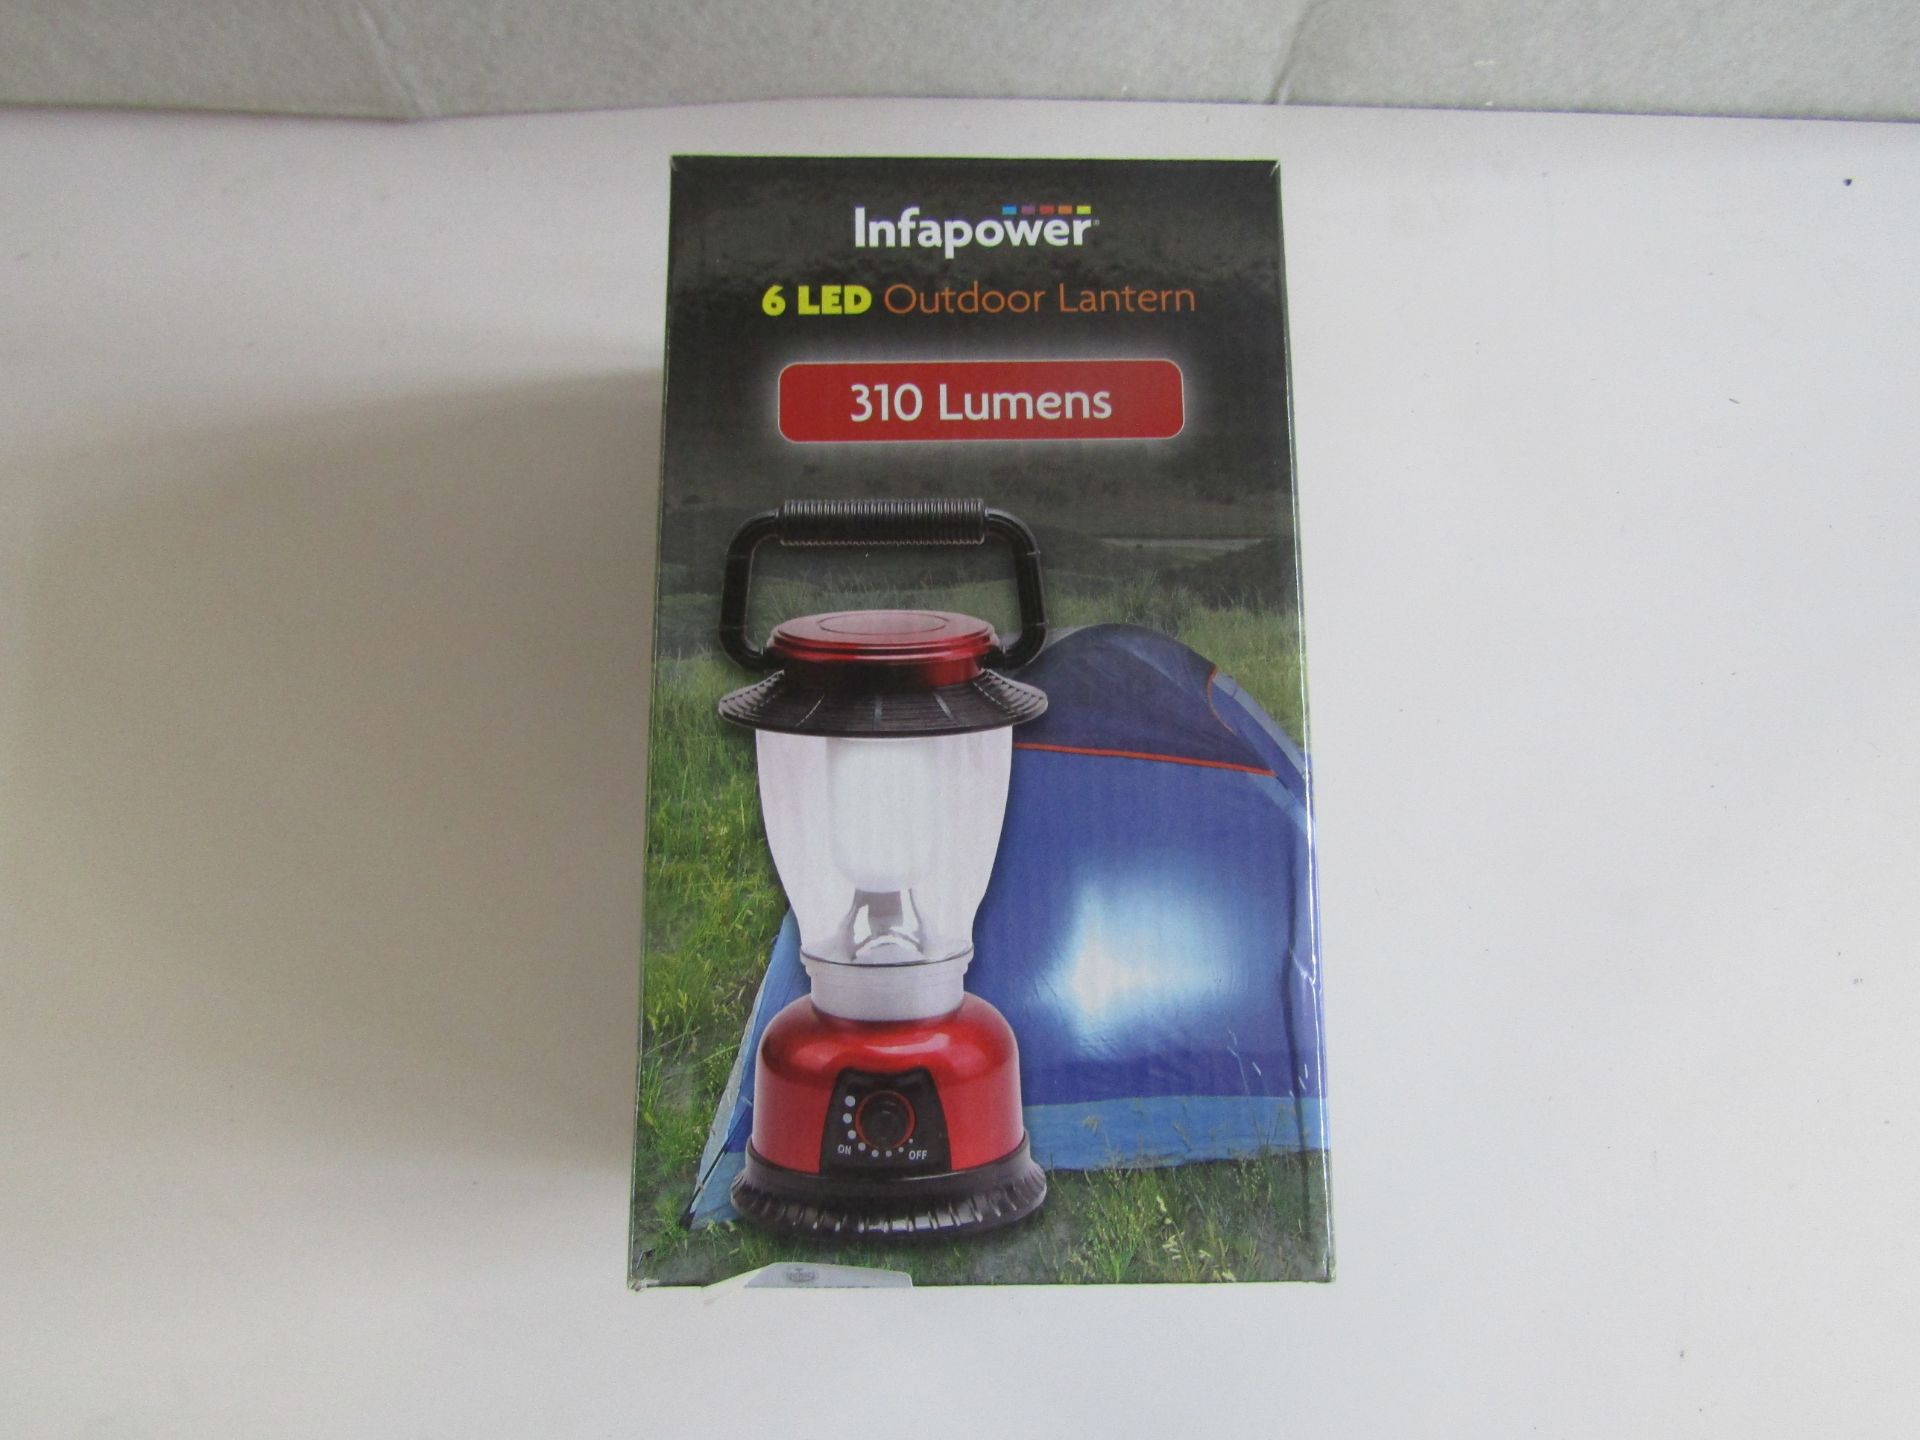 Infapower - LED Outdoor Lantern, 310 Lumens, Has A Small Crack On The Base - Untested.